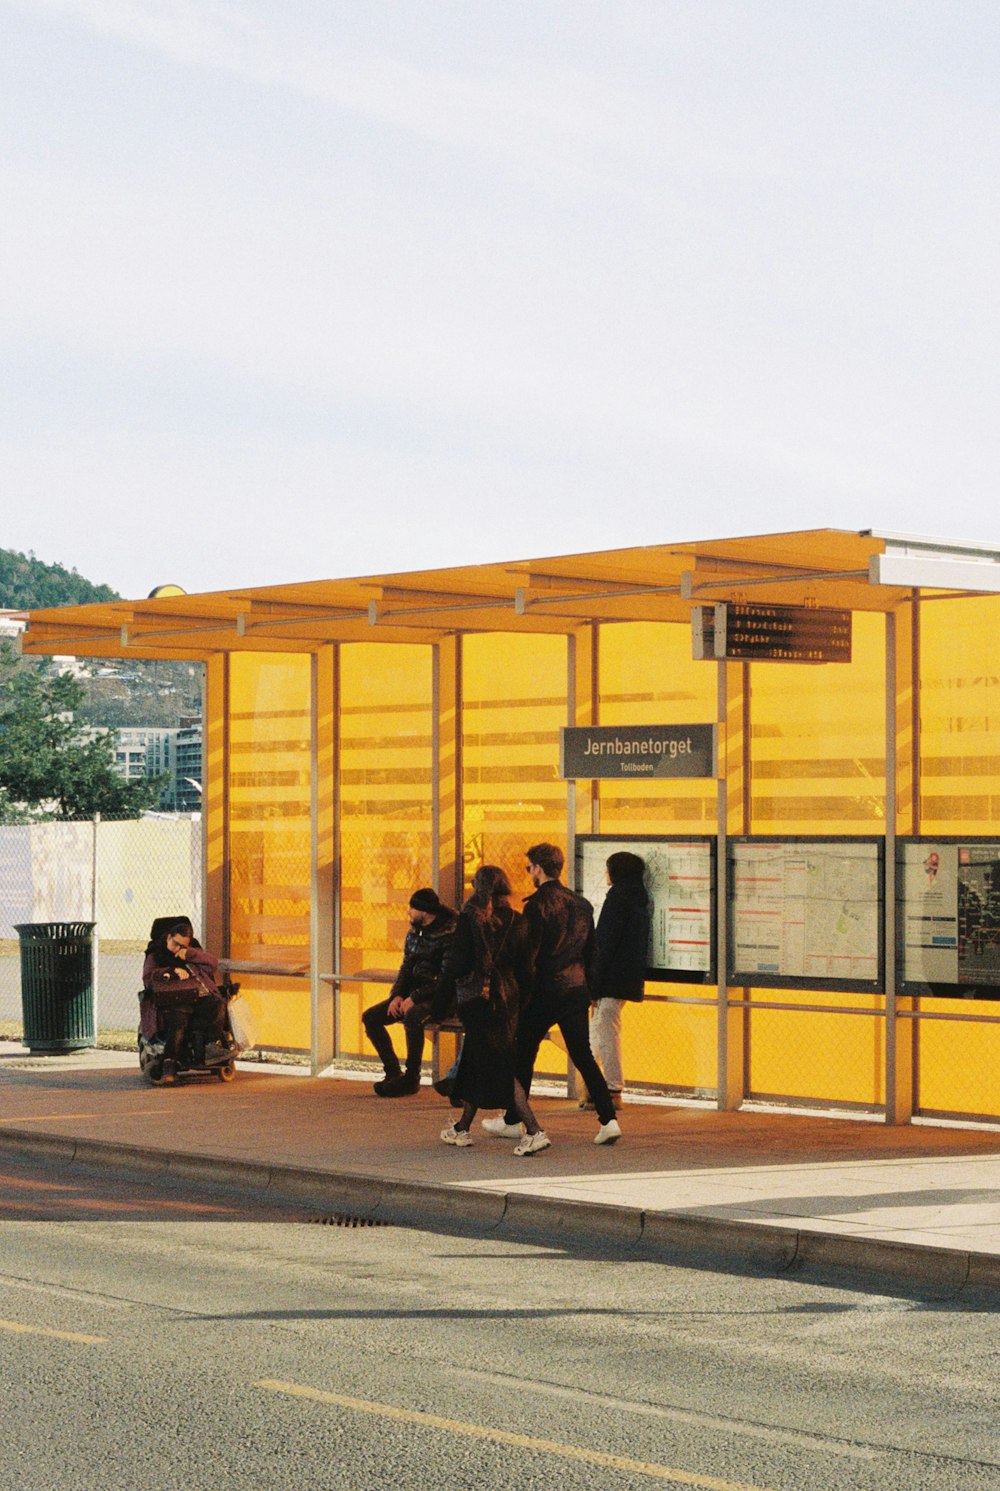 a group of people standing next to a bus stop